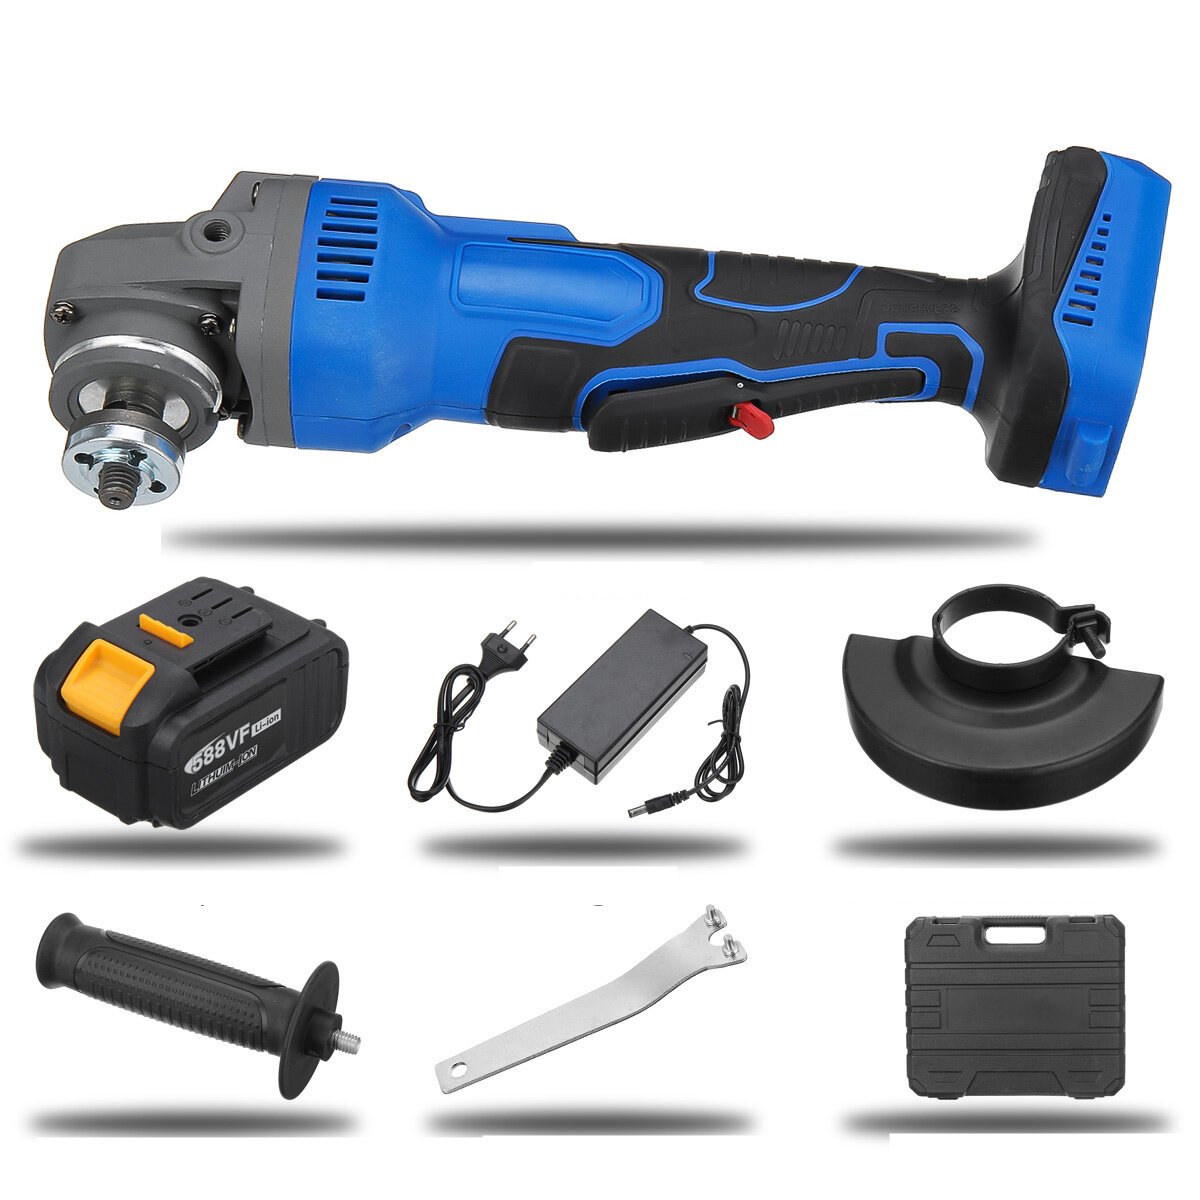 Image of 588VF Cordless Brushless 100mm 1580W Electric Angle Grinder 3 Gears Adjustable Grinding Machine Polisher